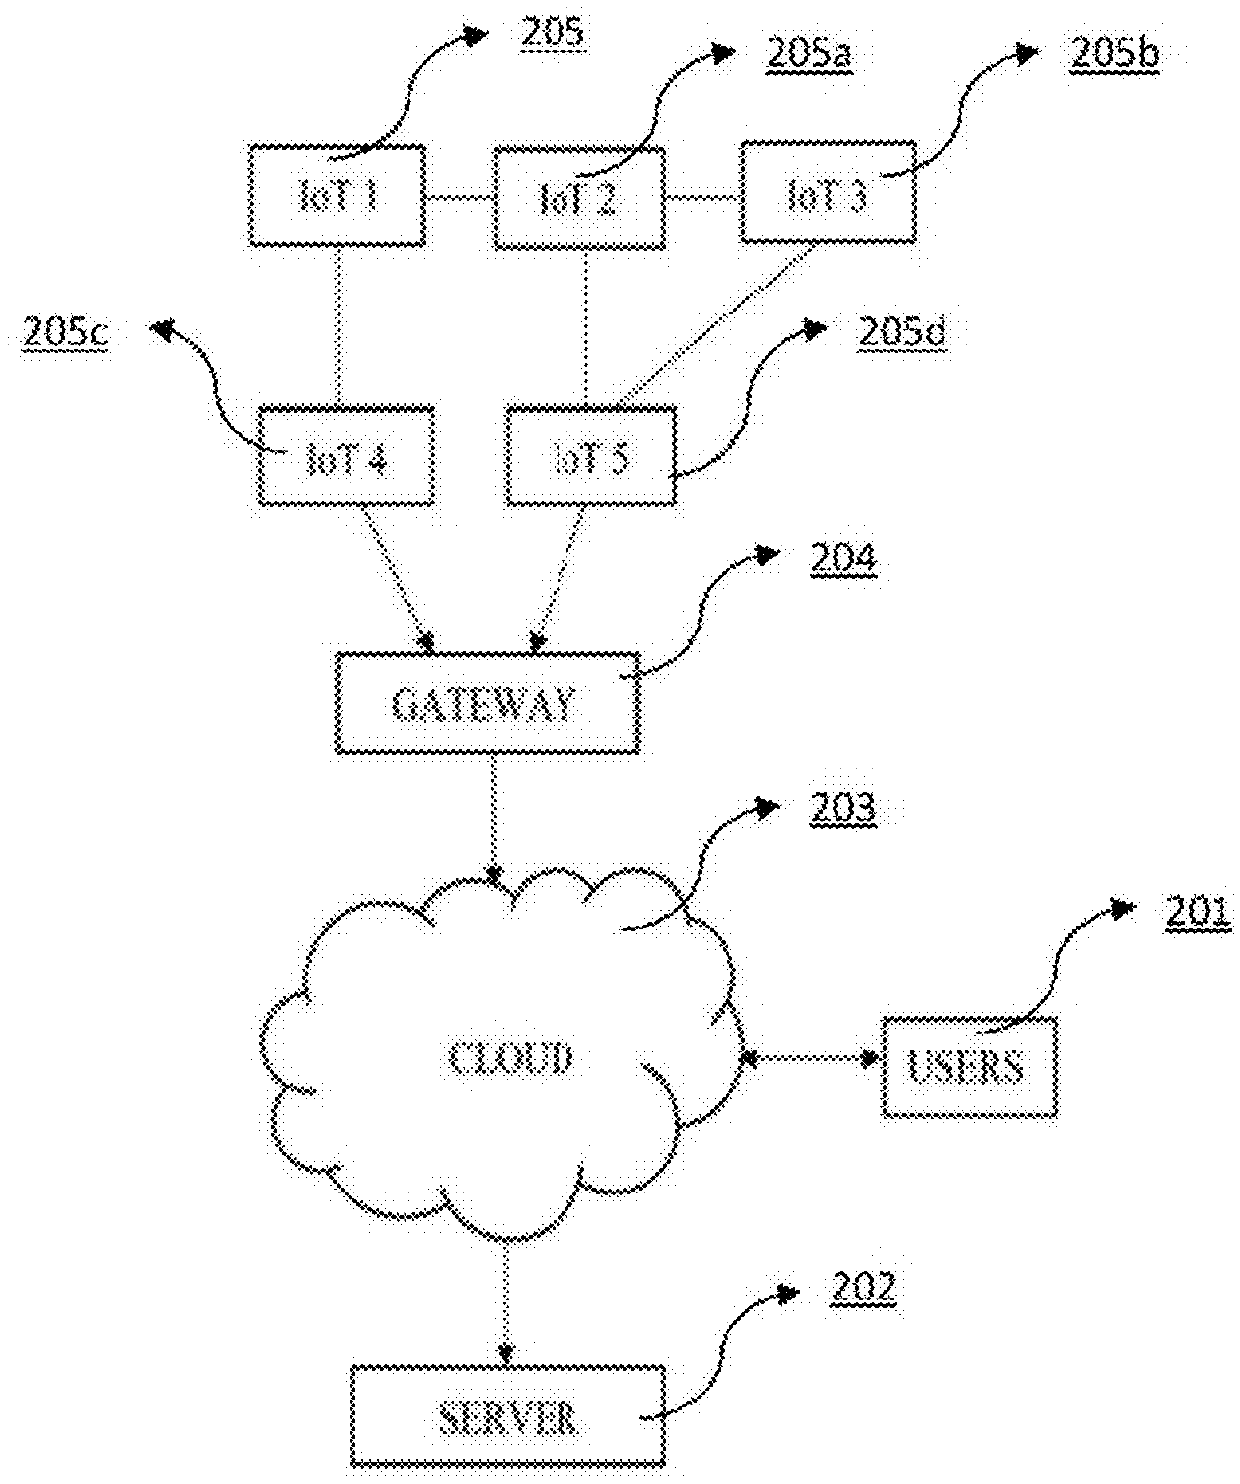 Multi-Level User Device Authentication System for Internet of Things (IOT)